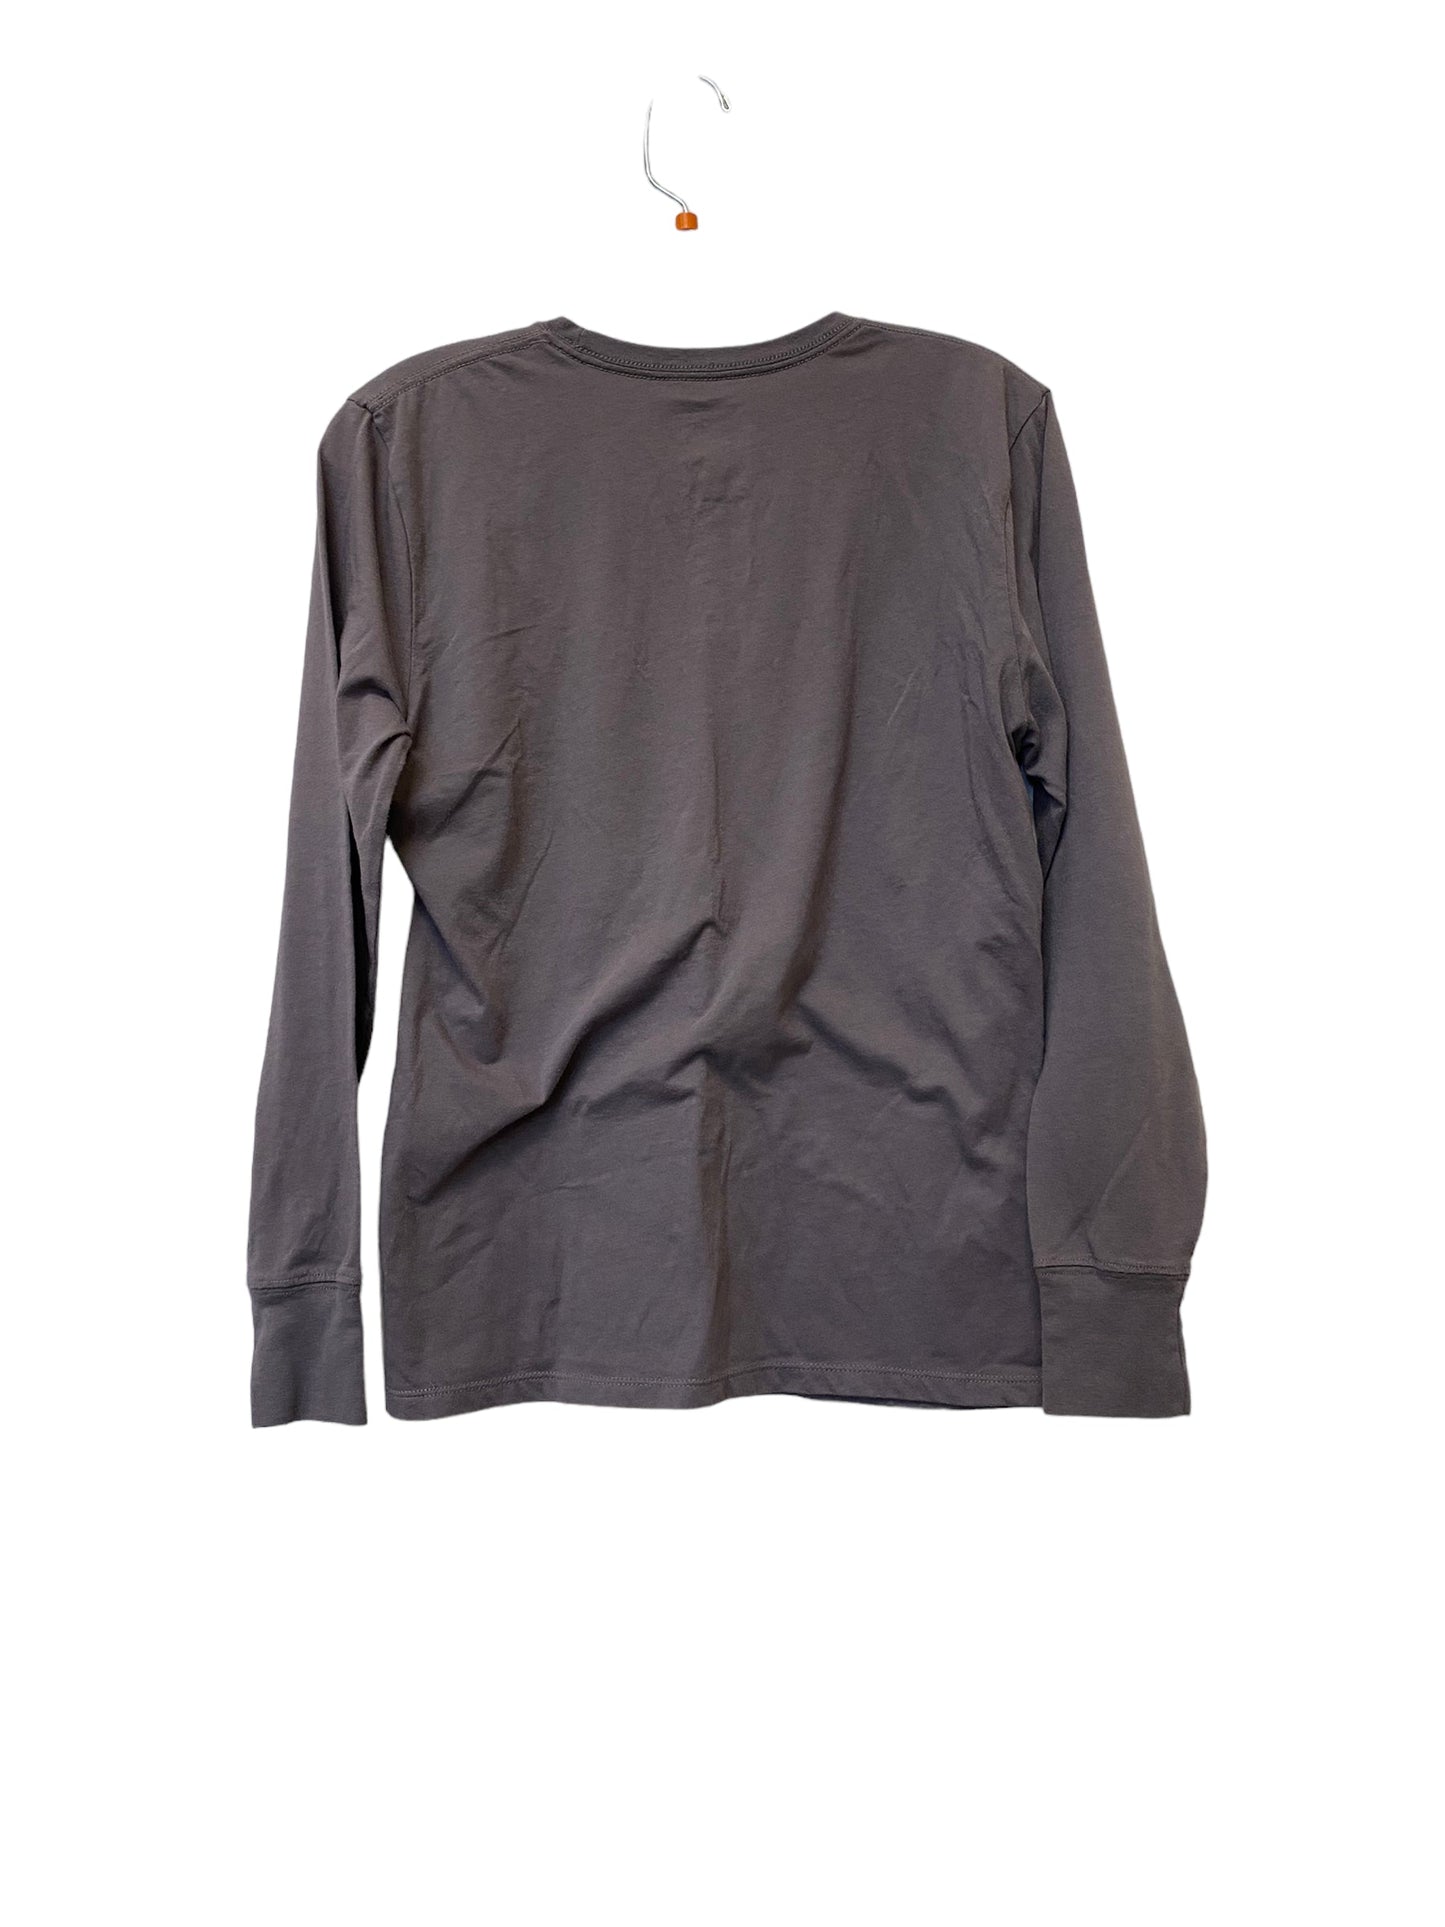 Top Long Sleeve Basic By North Face  Size: S